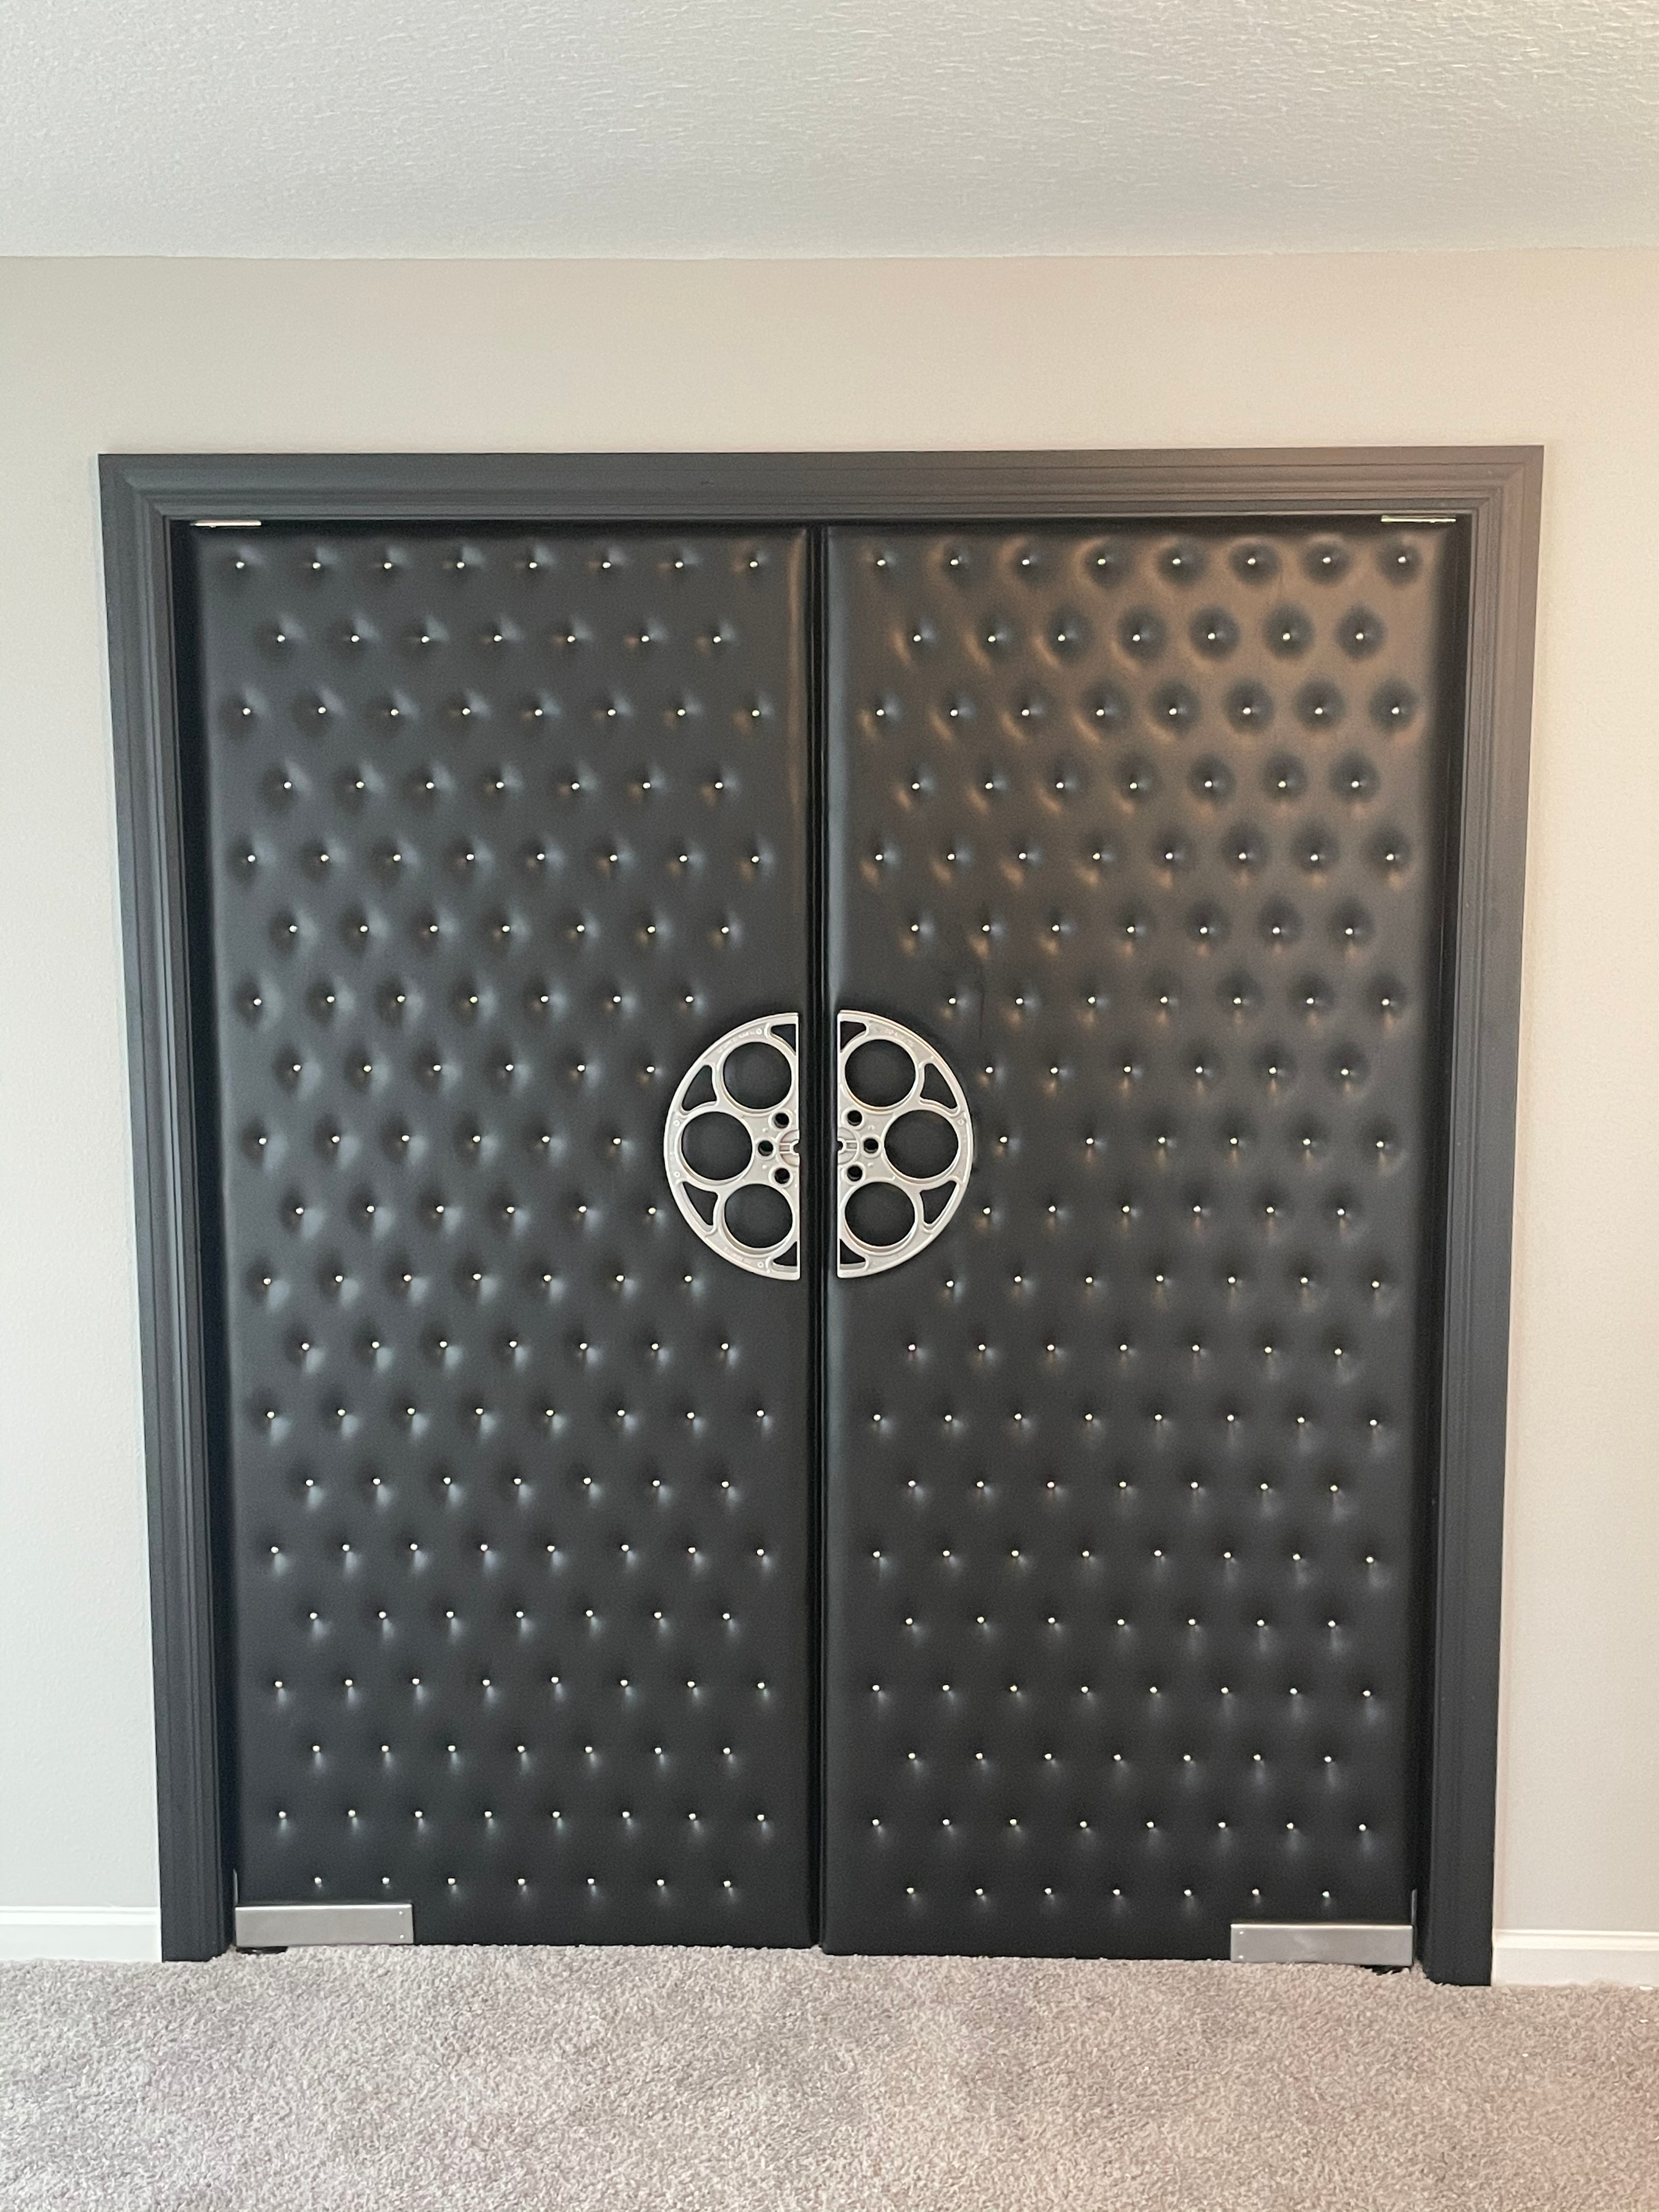 Black Double Usher Door! Shop Online at Home Theater Mart for your Themed Movie Décor, Unique Theater Goods, and more at Affordable Prices! Receive Free Domestic Shipping on orders over $100. Located in Chicago, IL.